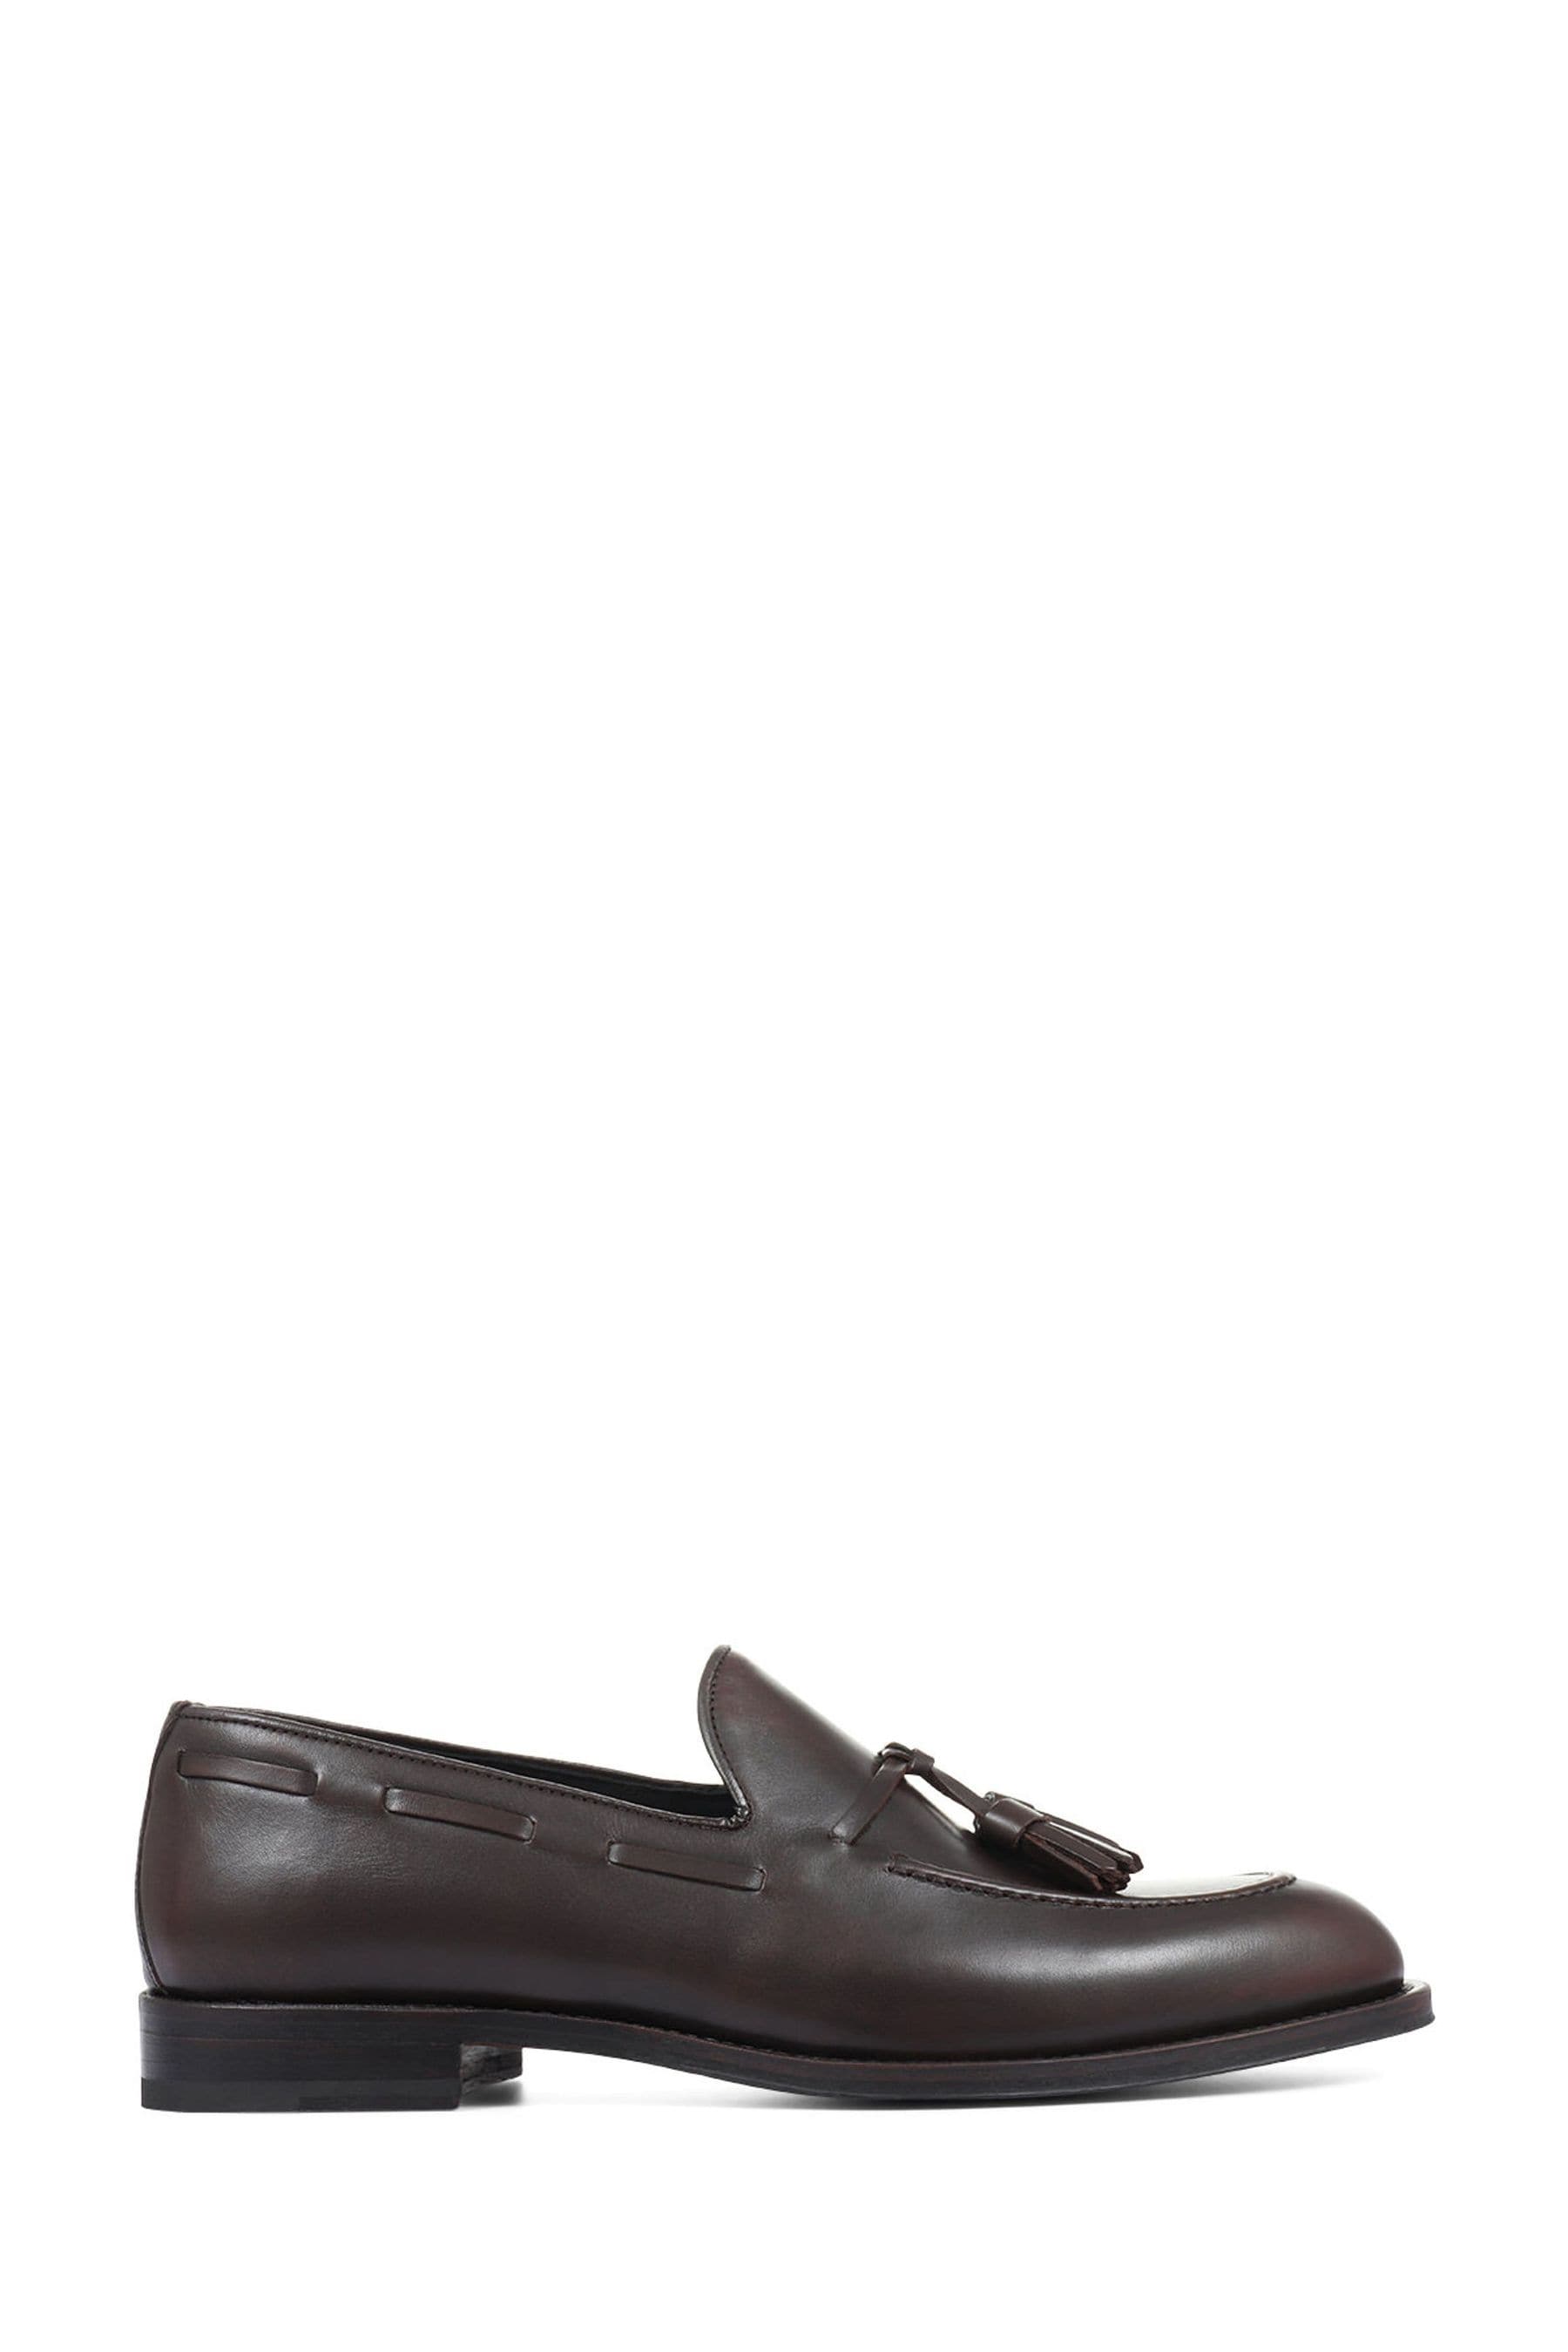 Buy Jones Bootmaker Brown Cannon Street Handmade Loafers from the Next ...